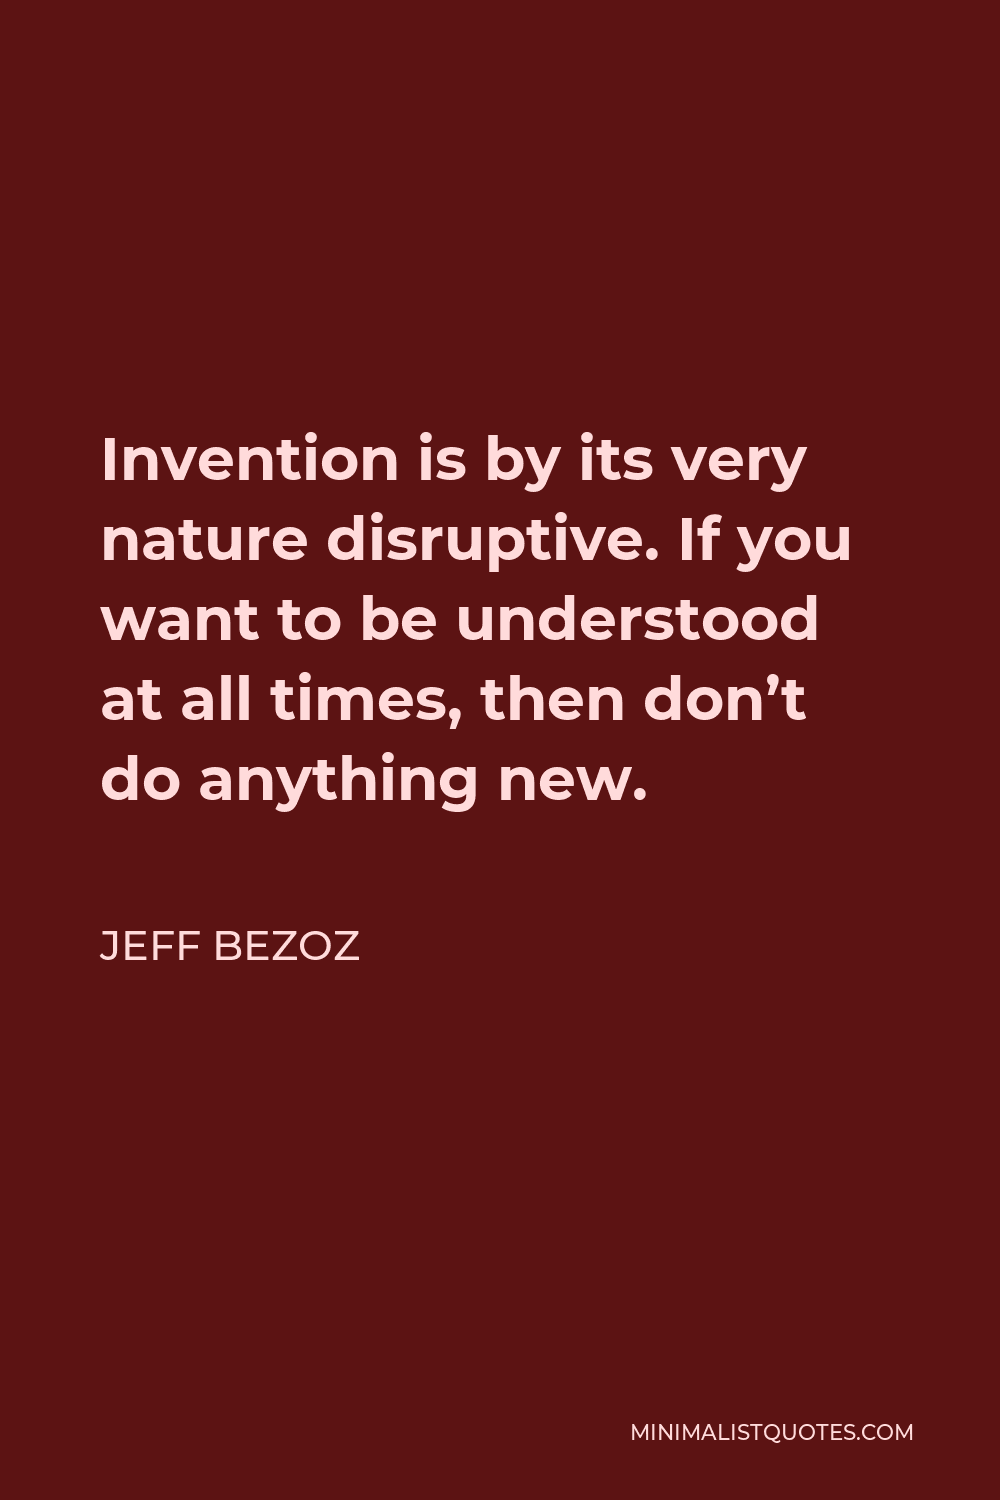 Jeff Bezoz Quote - Invention is by its very nature disruptive. If you want to be understood at all times, then don’t do anything new.